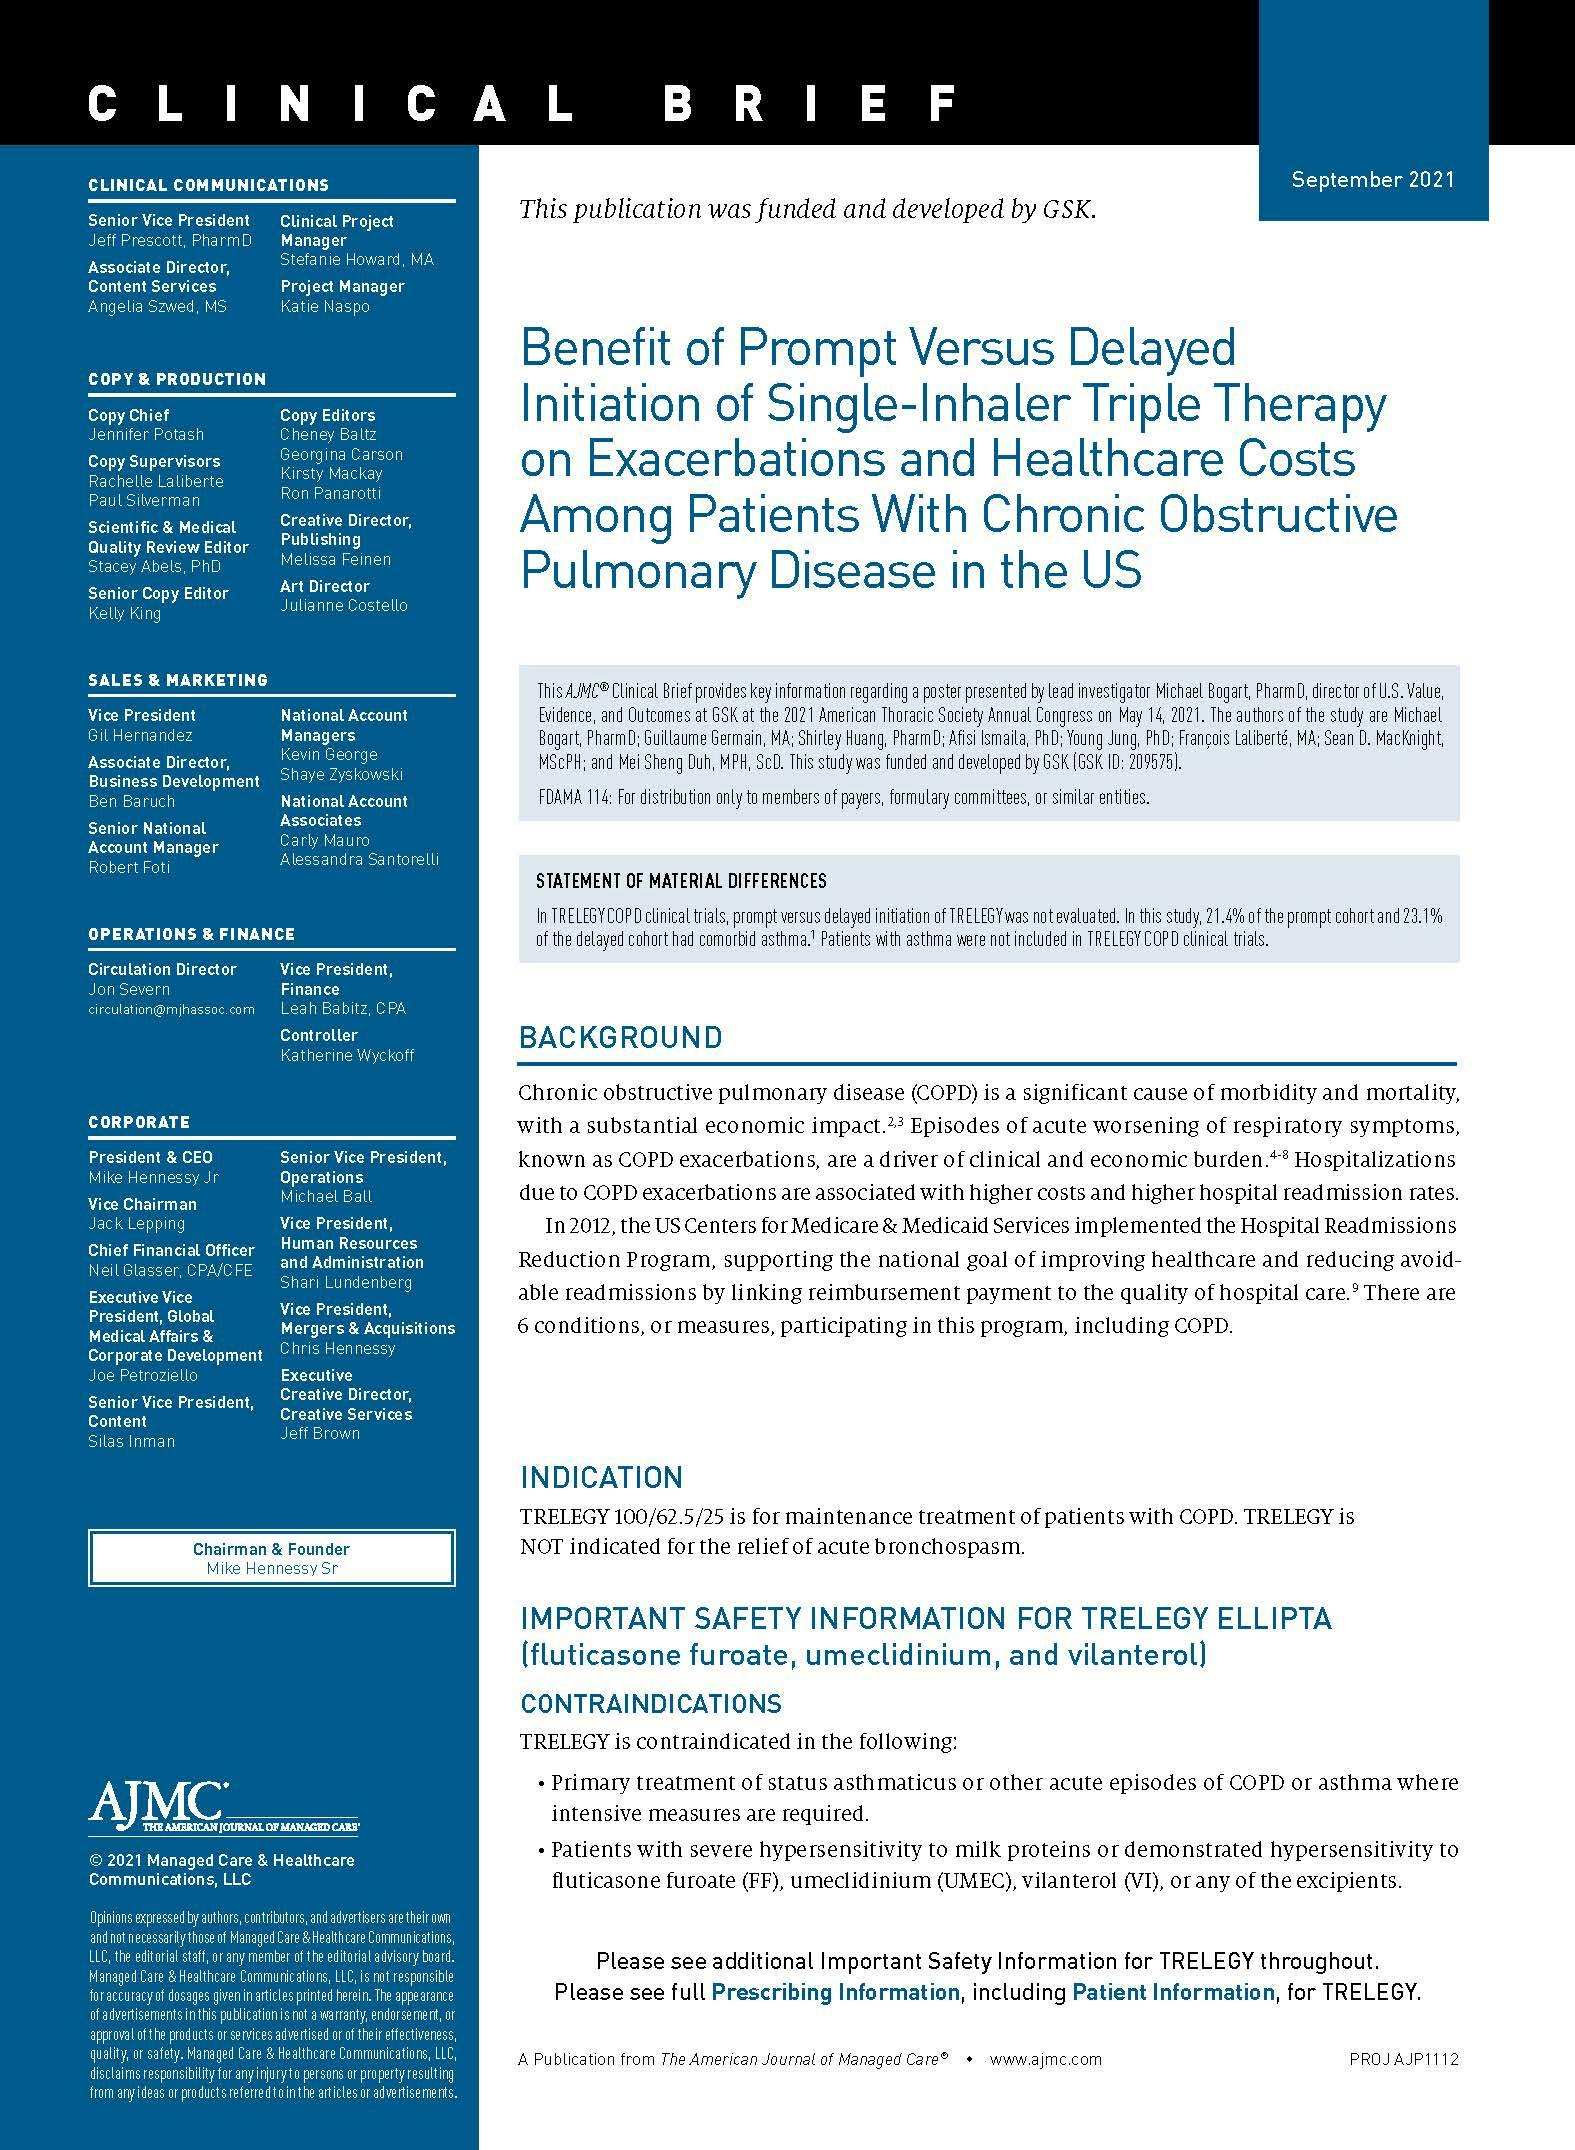 Benefit of Prompt Versus Delayed Initiation of Single-Inhaler Triple Therapy on Exacerbations and Healthcare Costs Among Patients with Chronic Obstructive Pulmonary Disease in the US